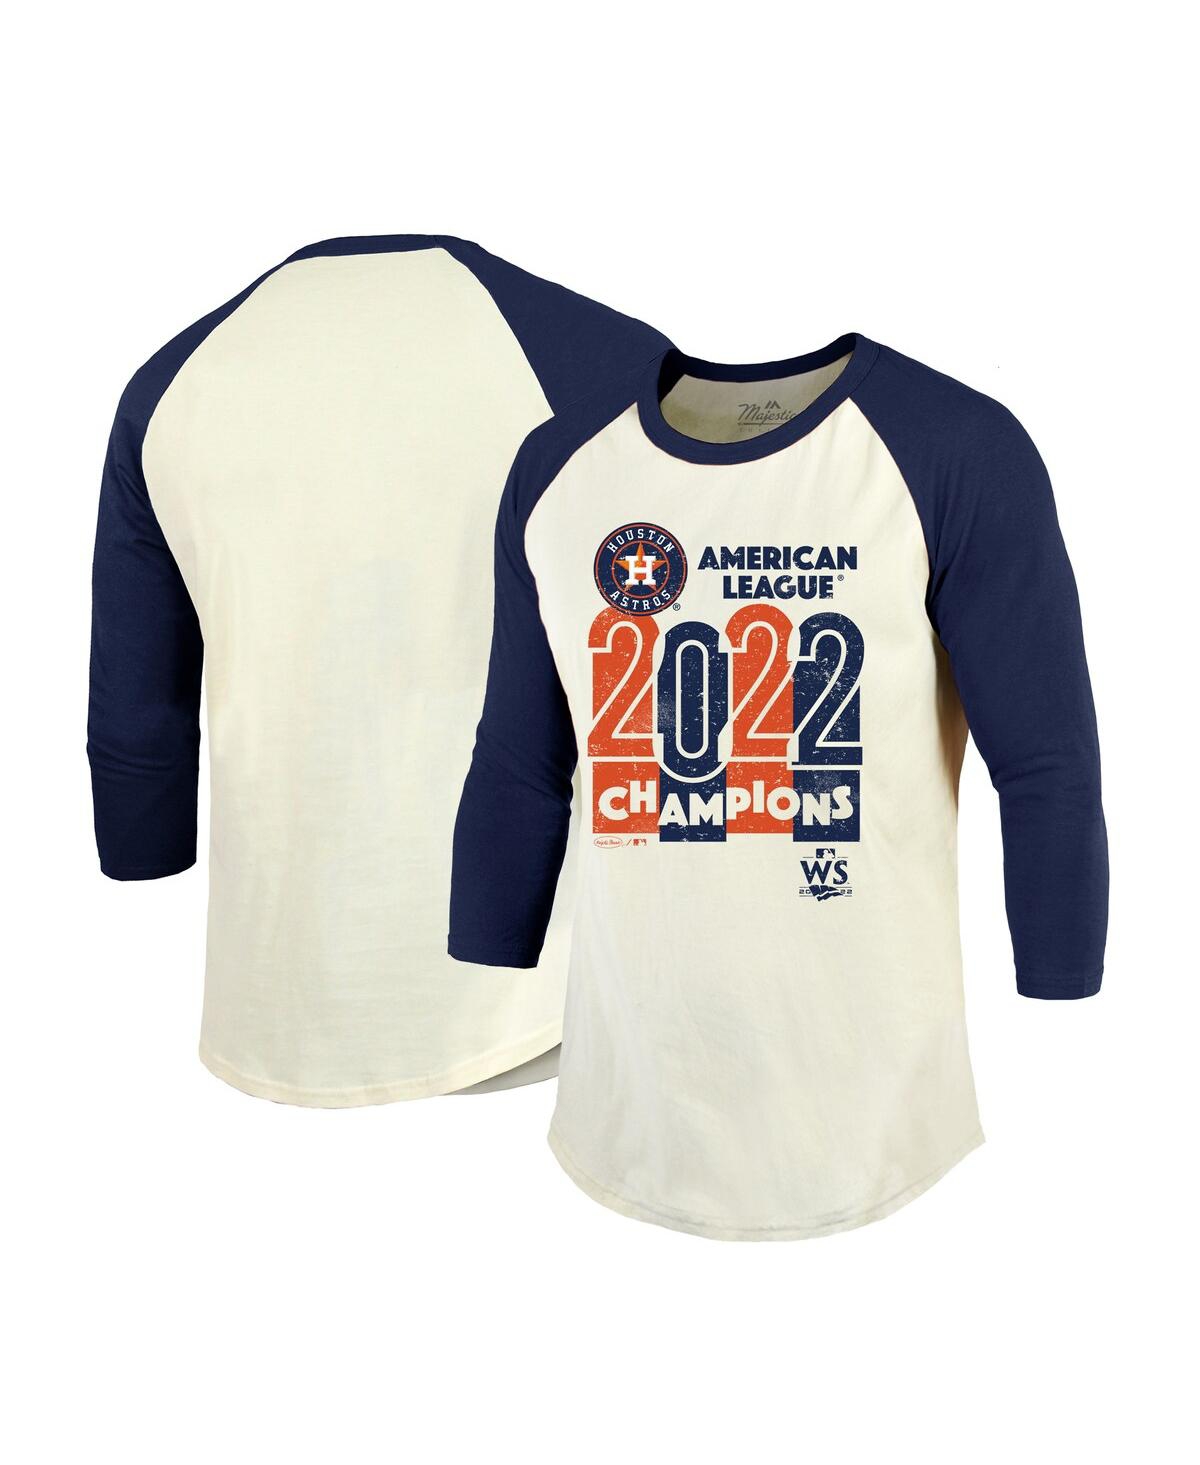 Shop Majestic Men's  Threads Cream, Navy Houston Astros 2022 American League Champions Yearbook Tri-blend  In Cream,navy